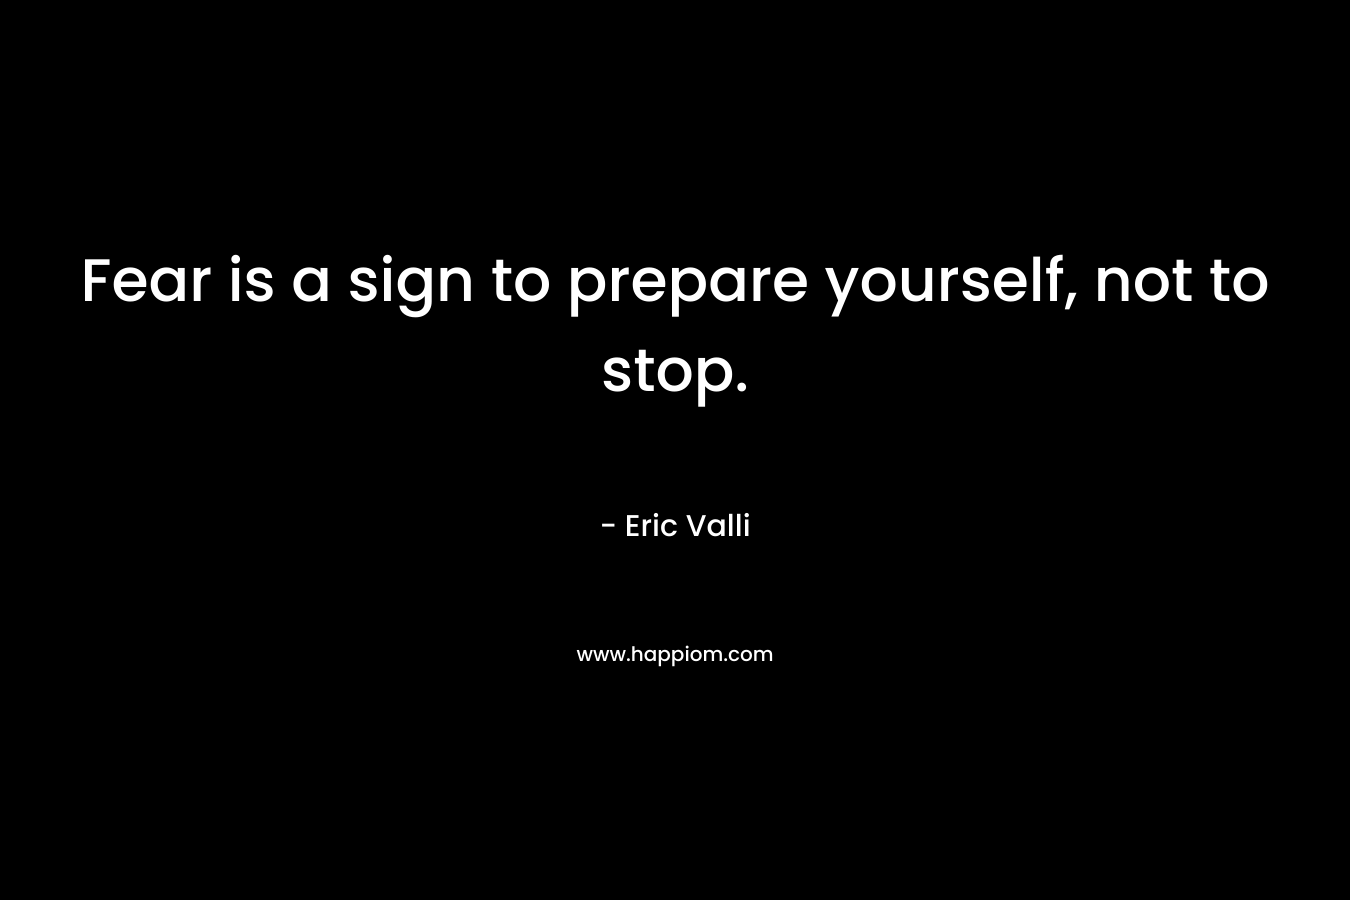 Fear is a sign to prepare yourself, not to stop.